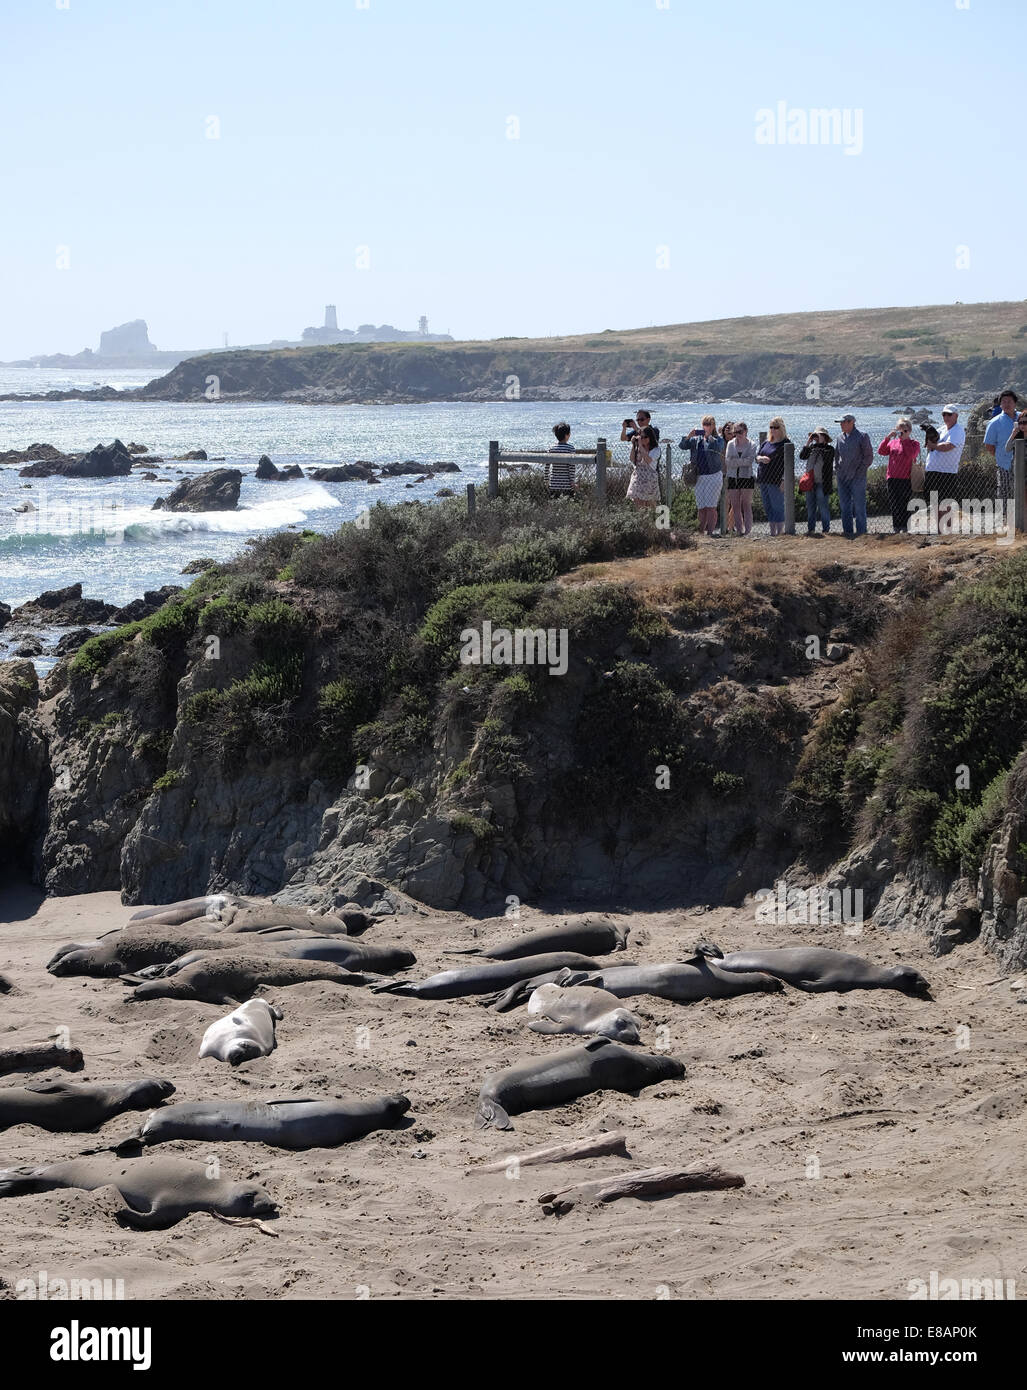 Tourist watch the Elephant seals on the beach in California Stock Photo